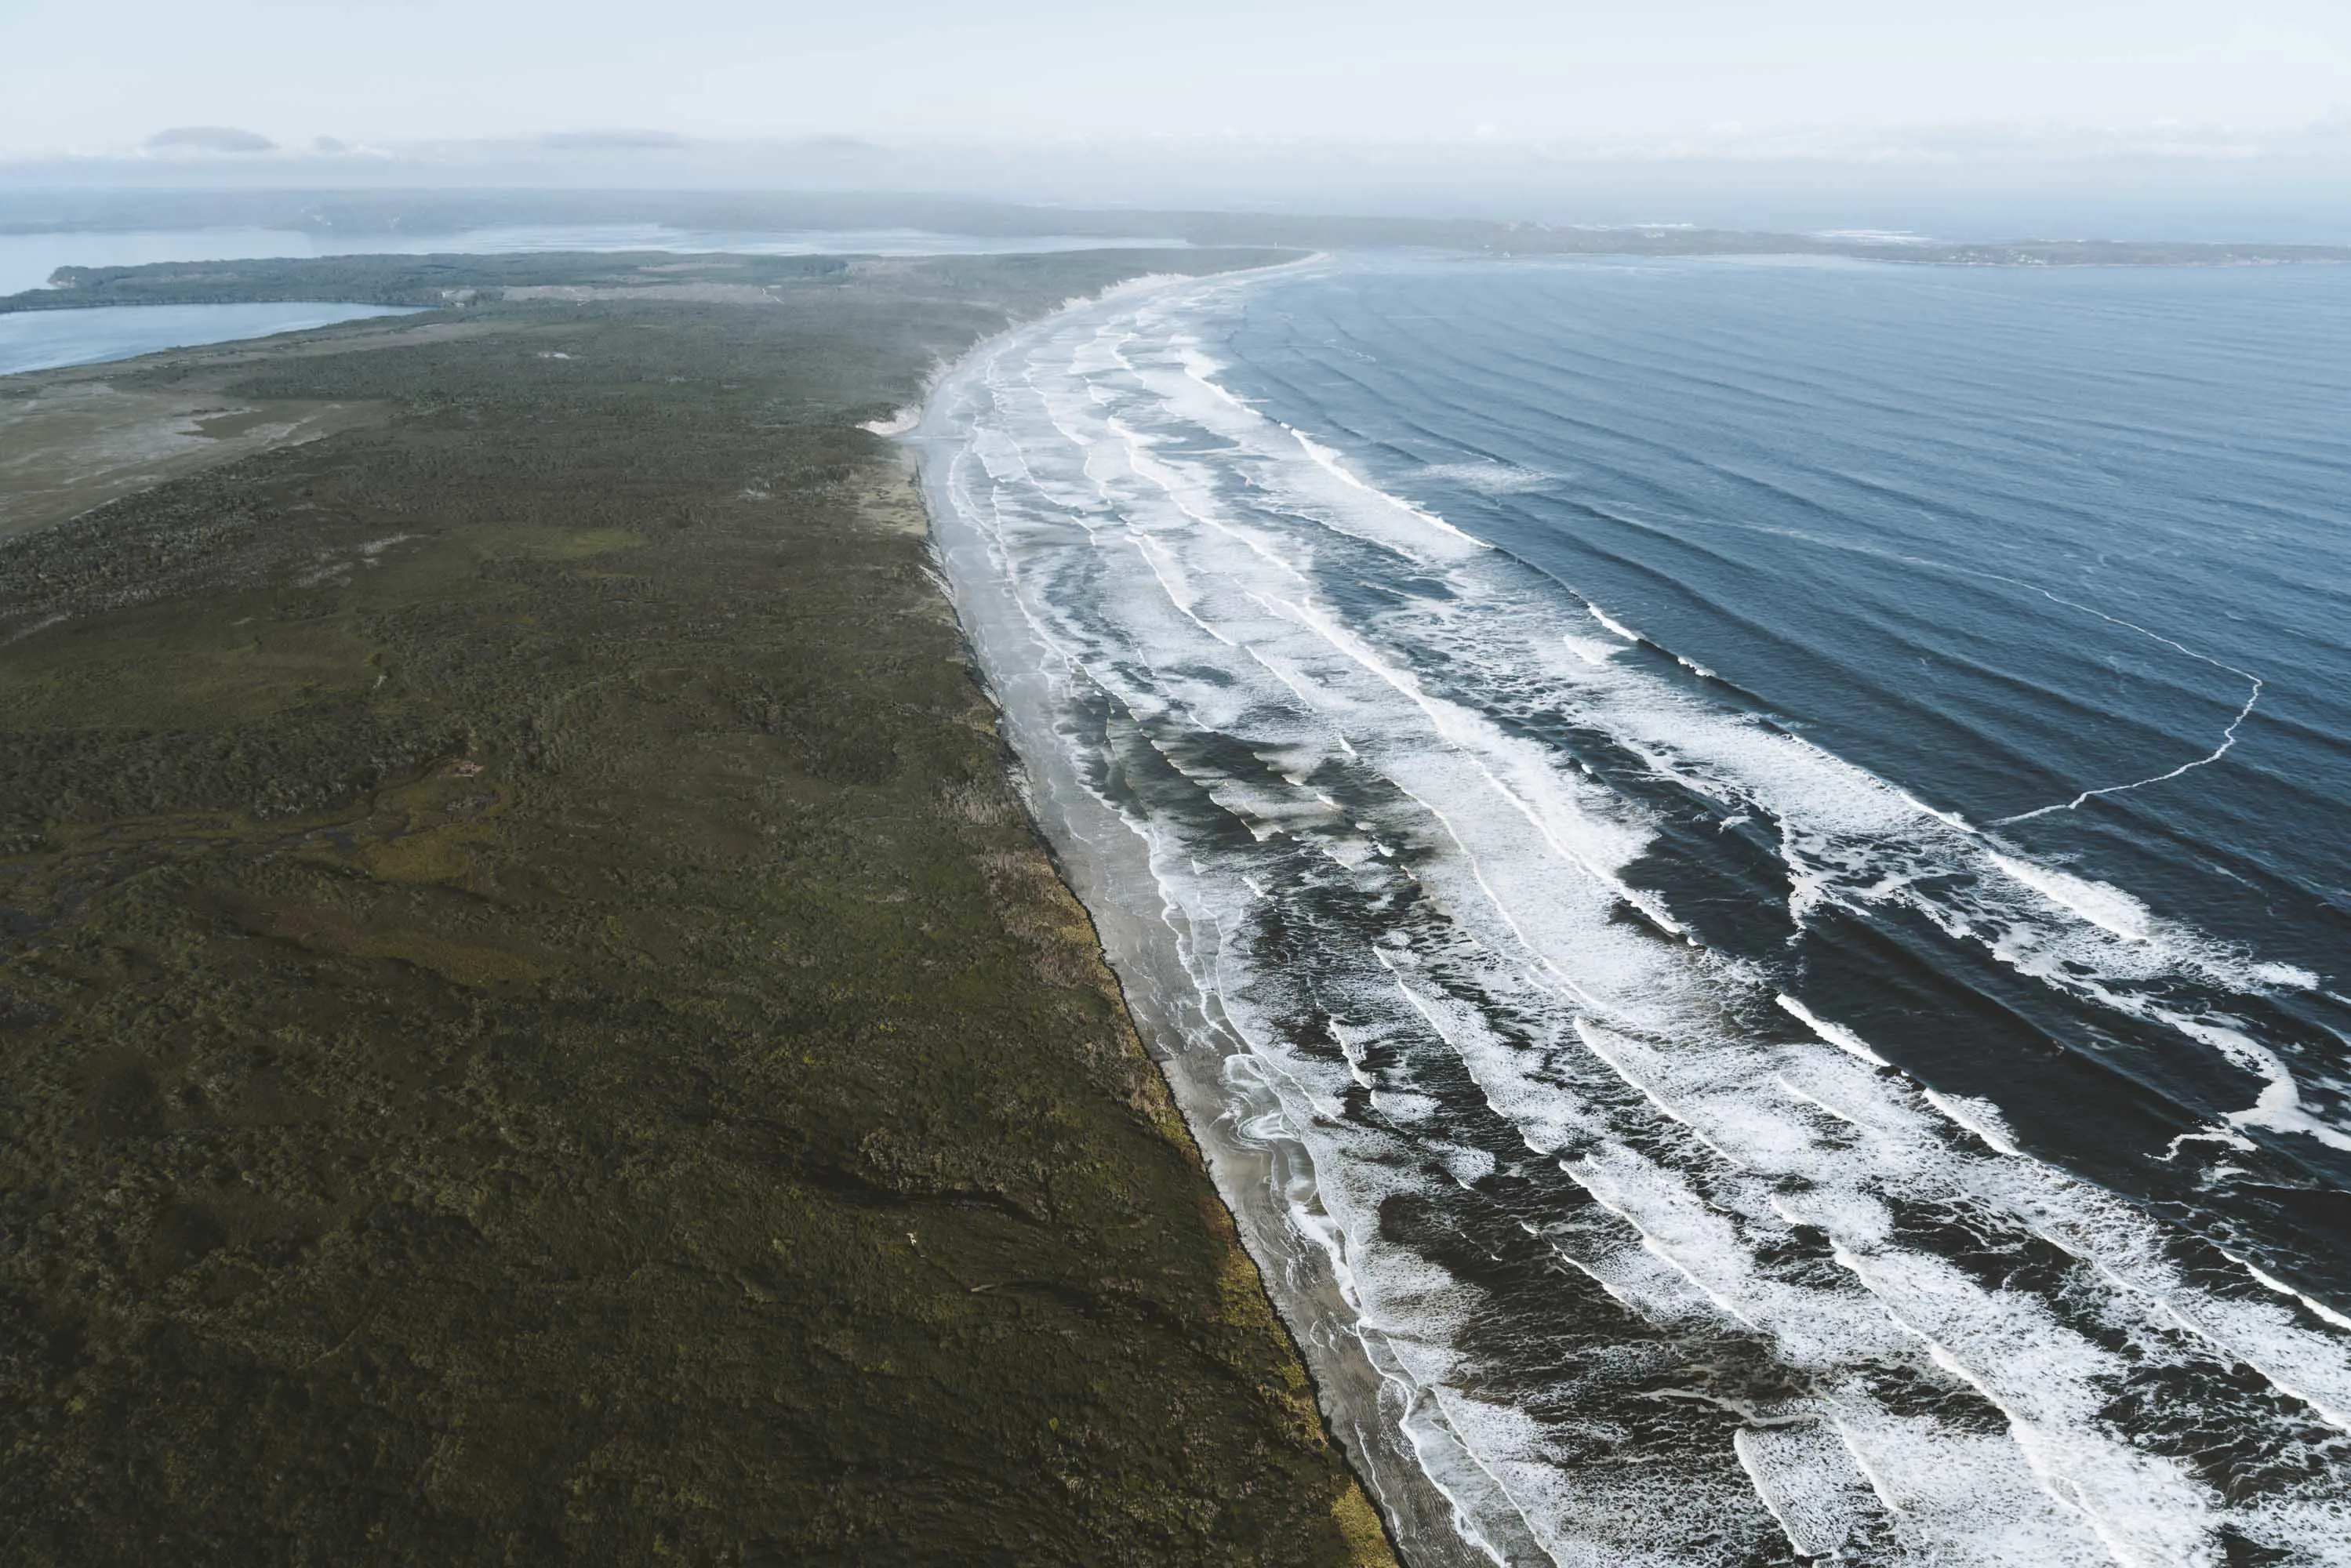 An aerial photograph of a beach with rough waves crashing on a narrow strip of grey sand.